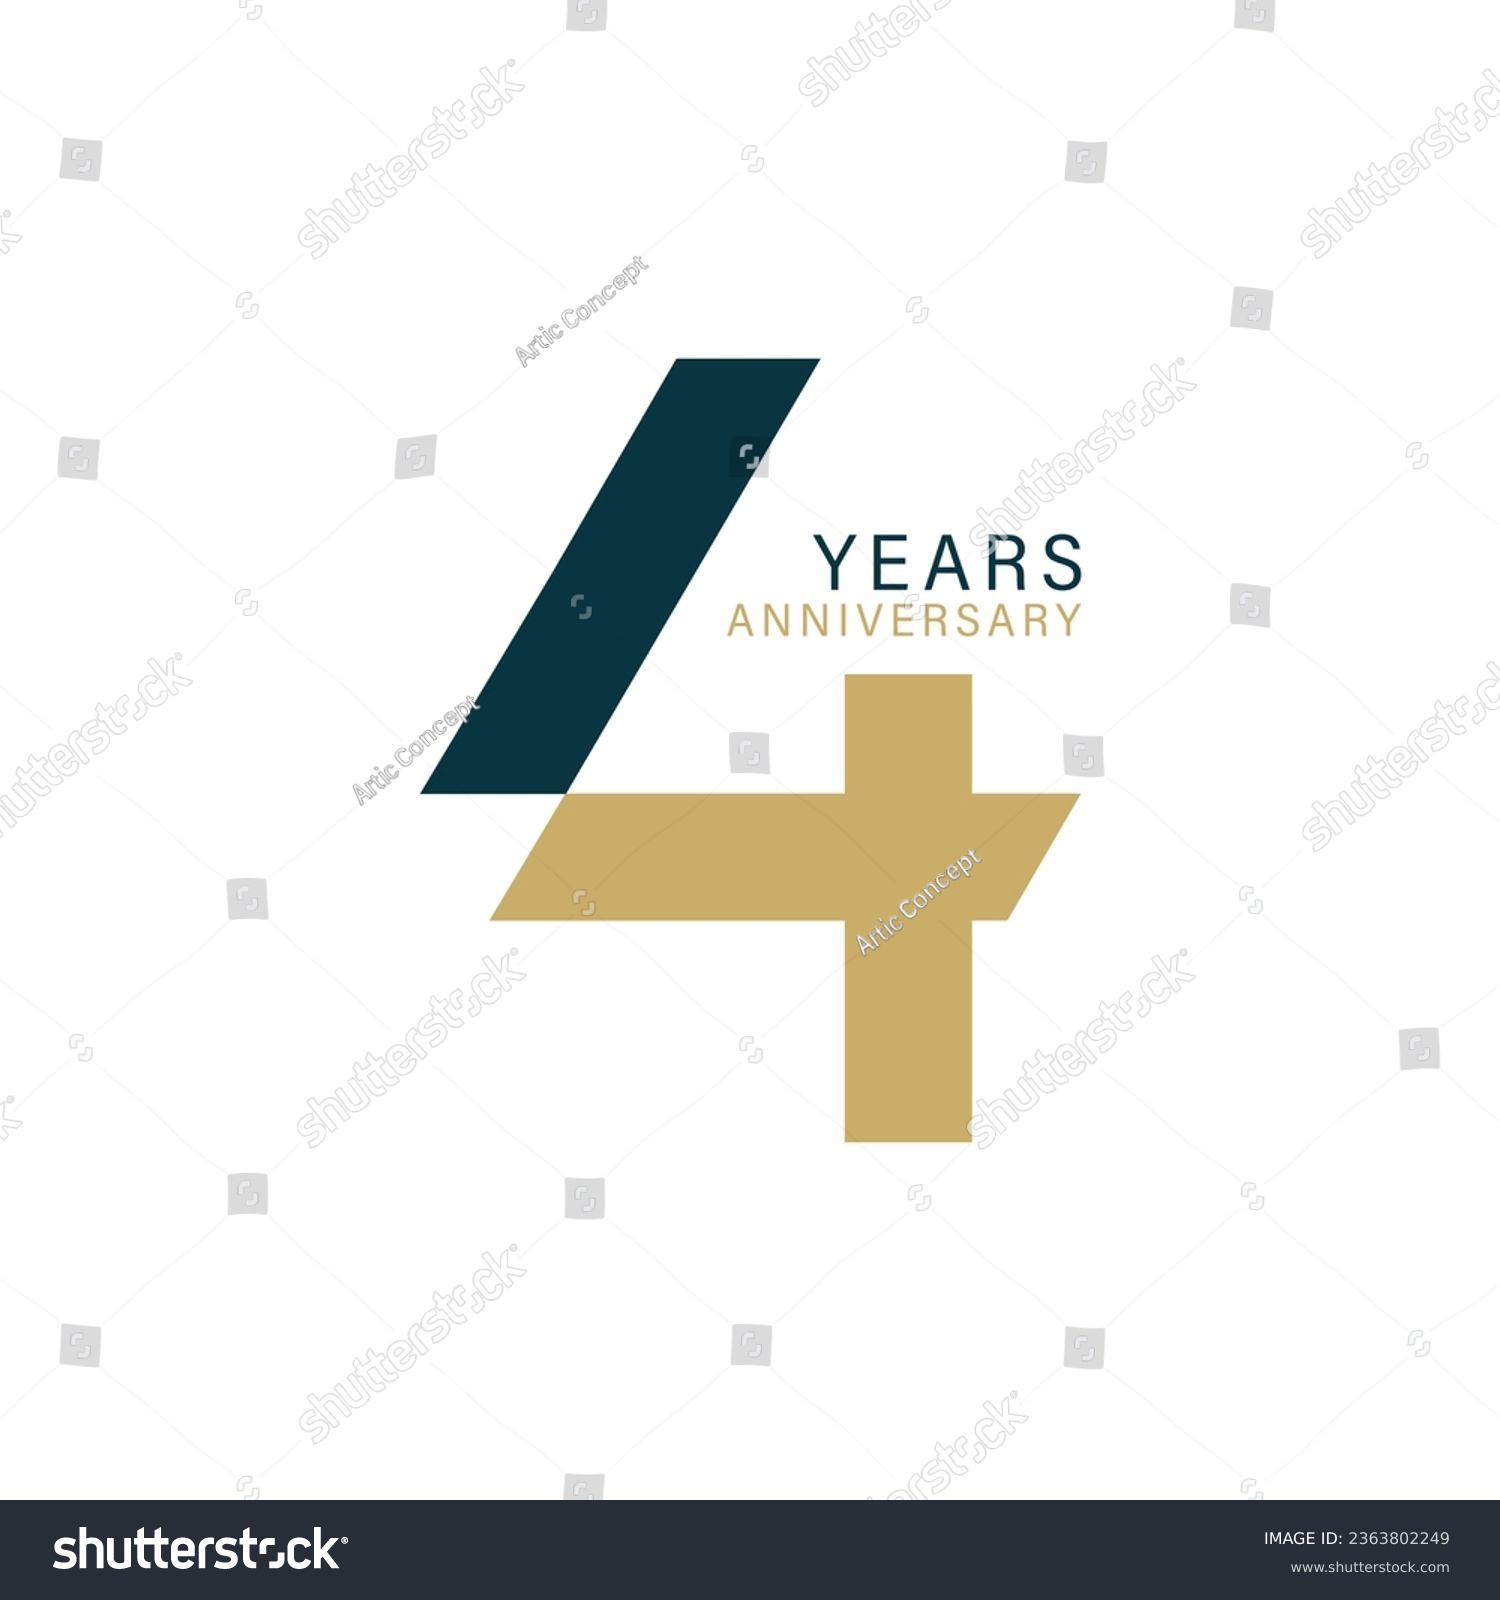 SVG of 4th, 4 Years Anniversary Logo, 4 birthday,  Vector Template Design element for birthday, invitation, wedding, jubilee and greeting card illustration. svg